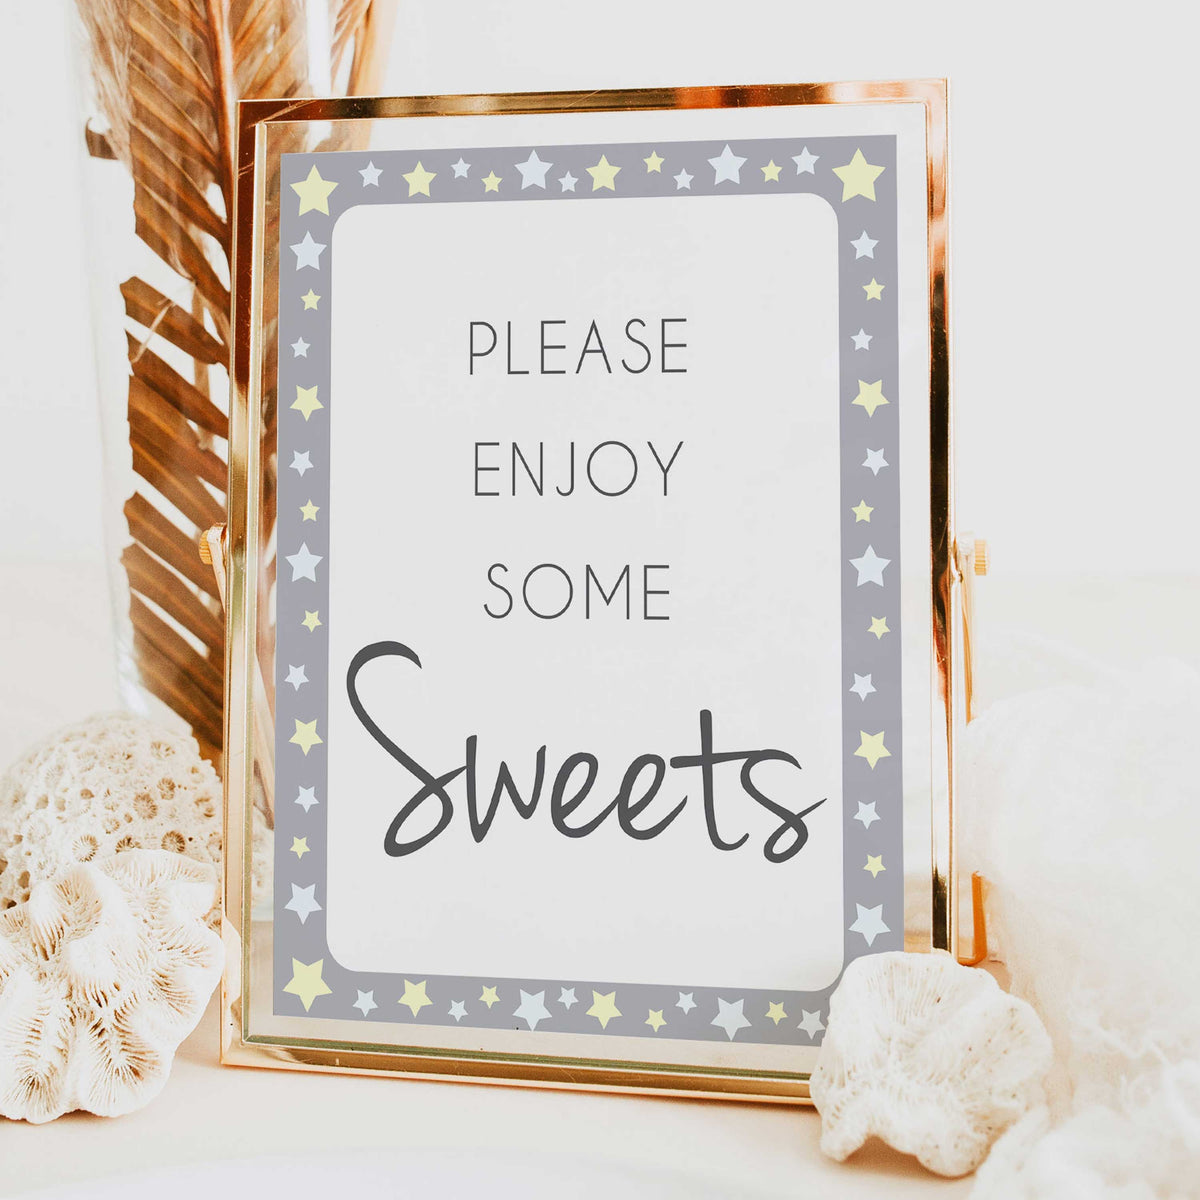 Printable baby signs, sweets baby sign, yellow and grey stars, printable baby shower signs, top baby shower decor, baby printable decor